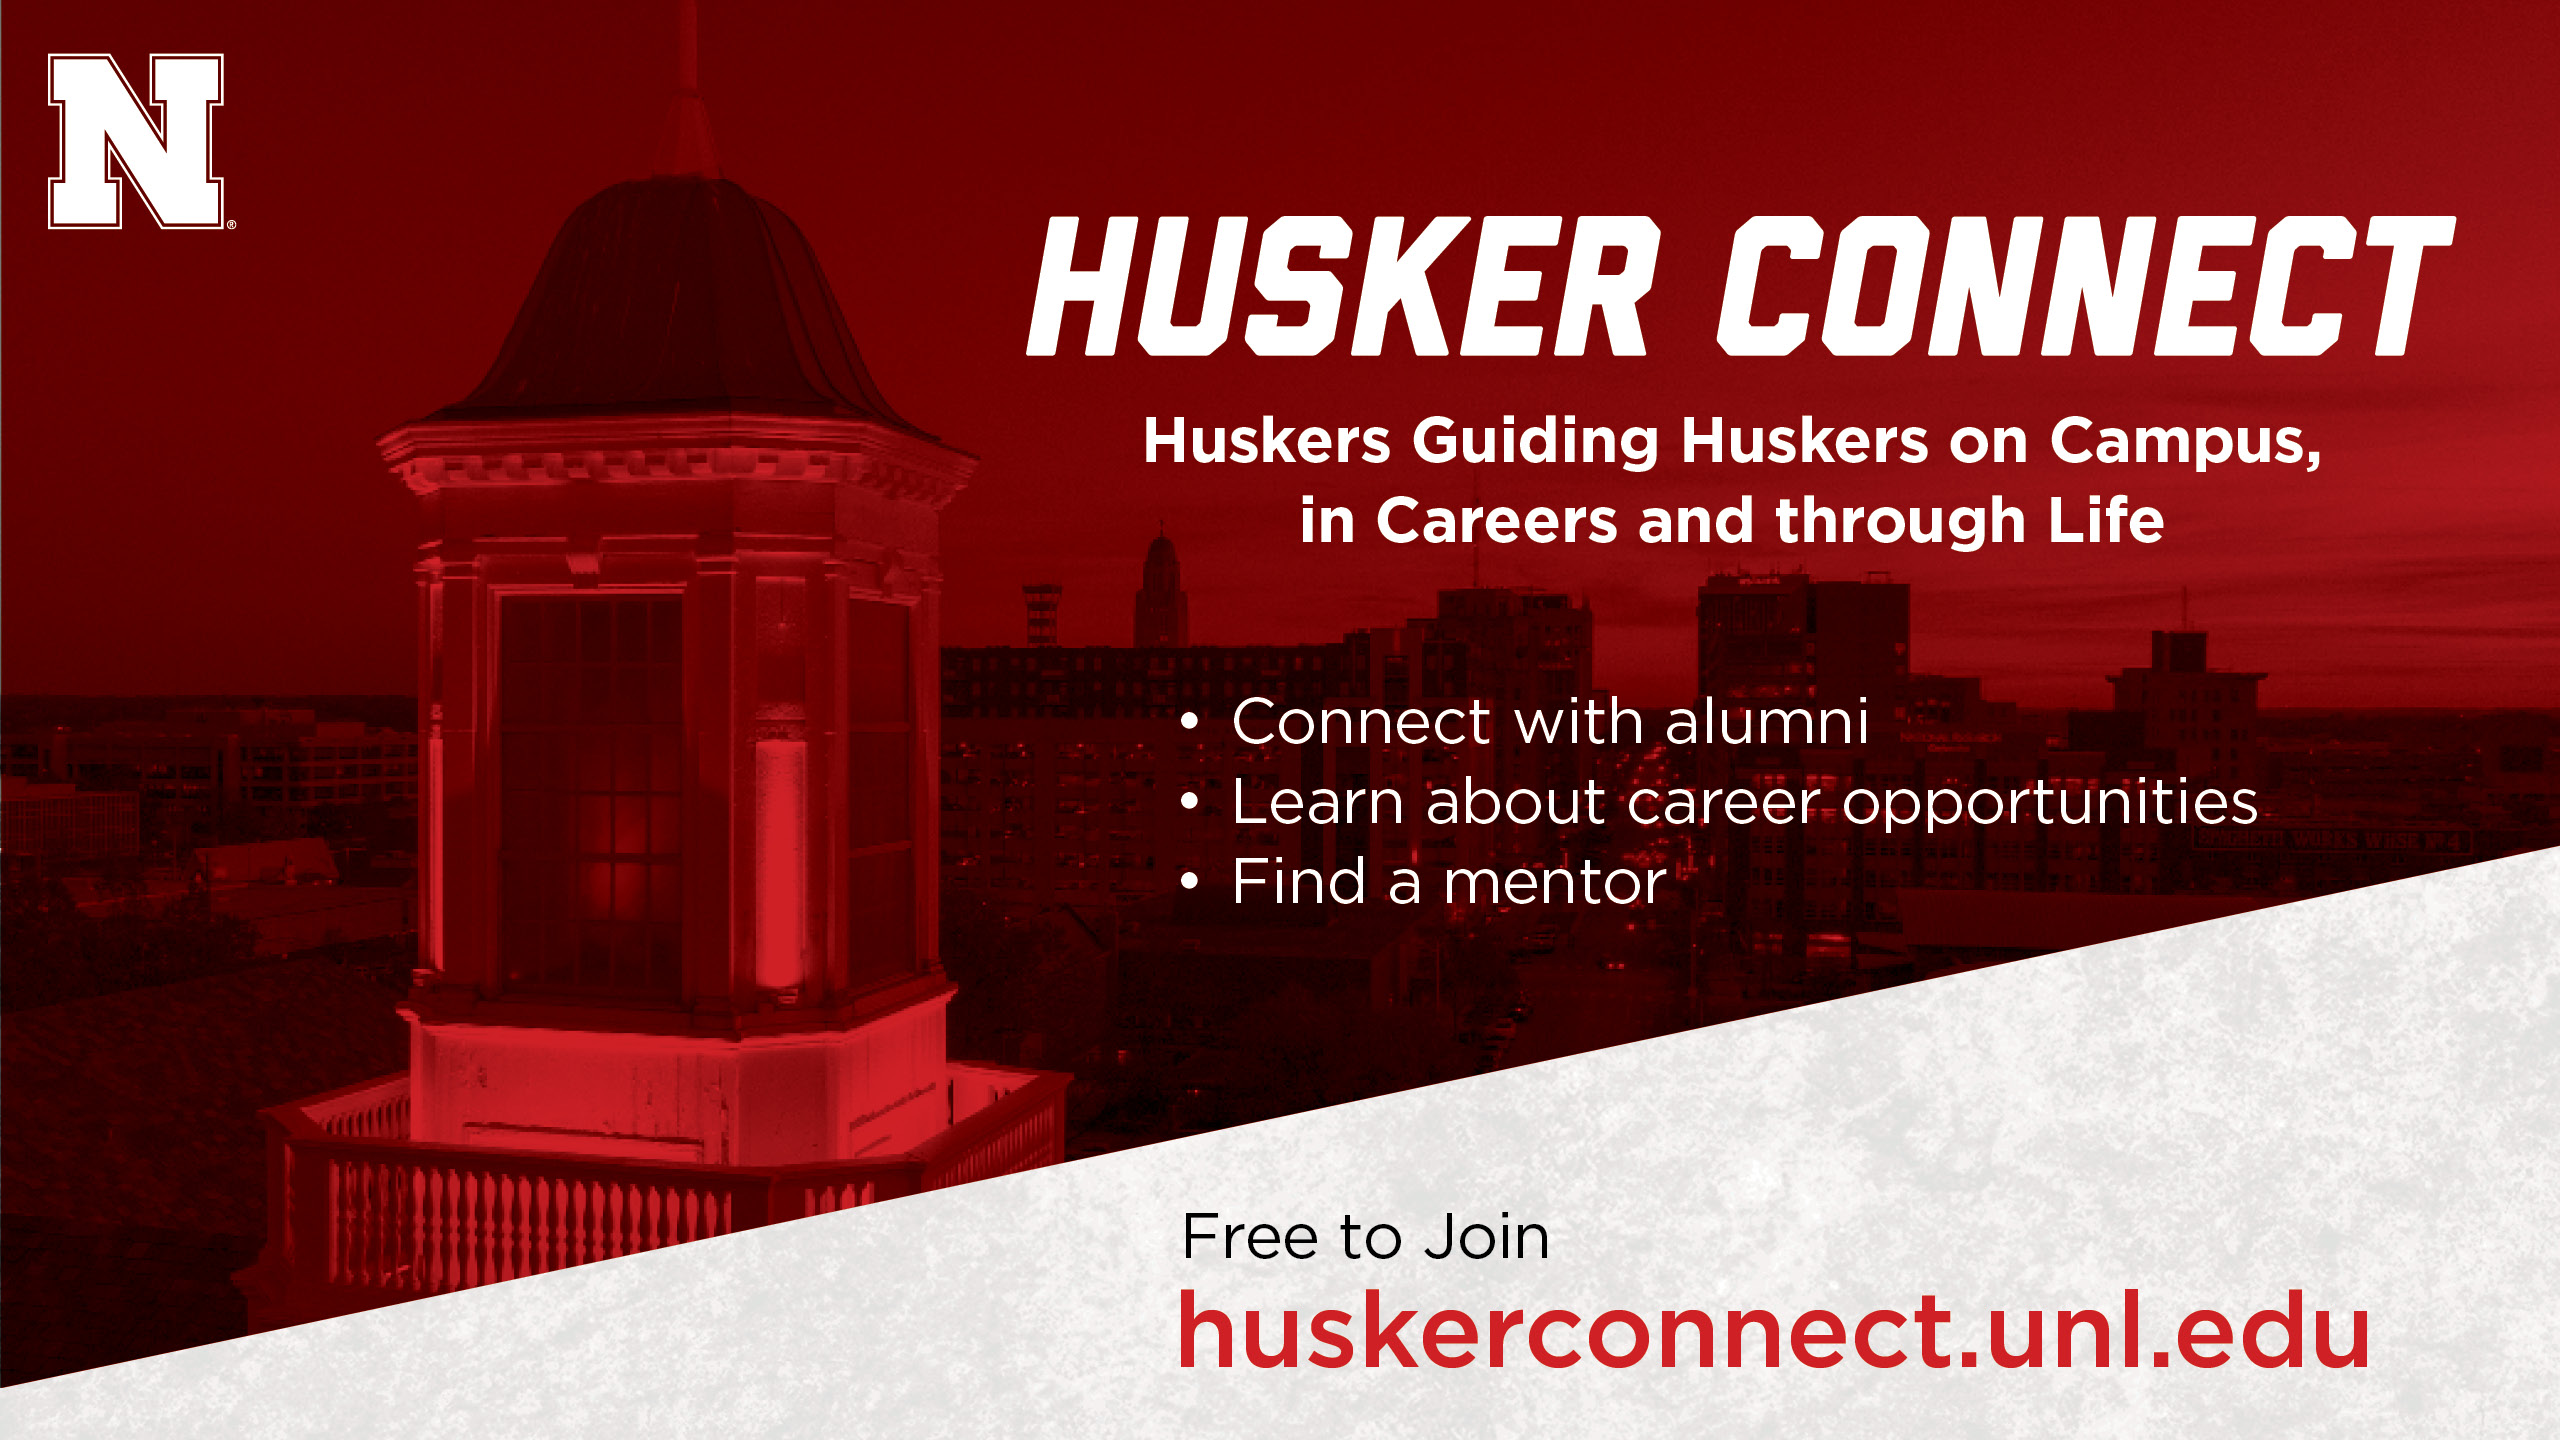 Use Husker Connect to jump start your career path.